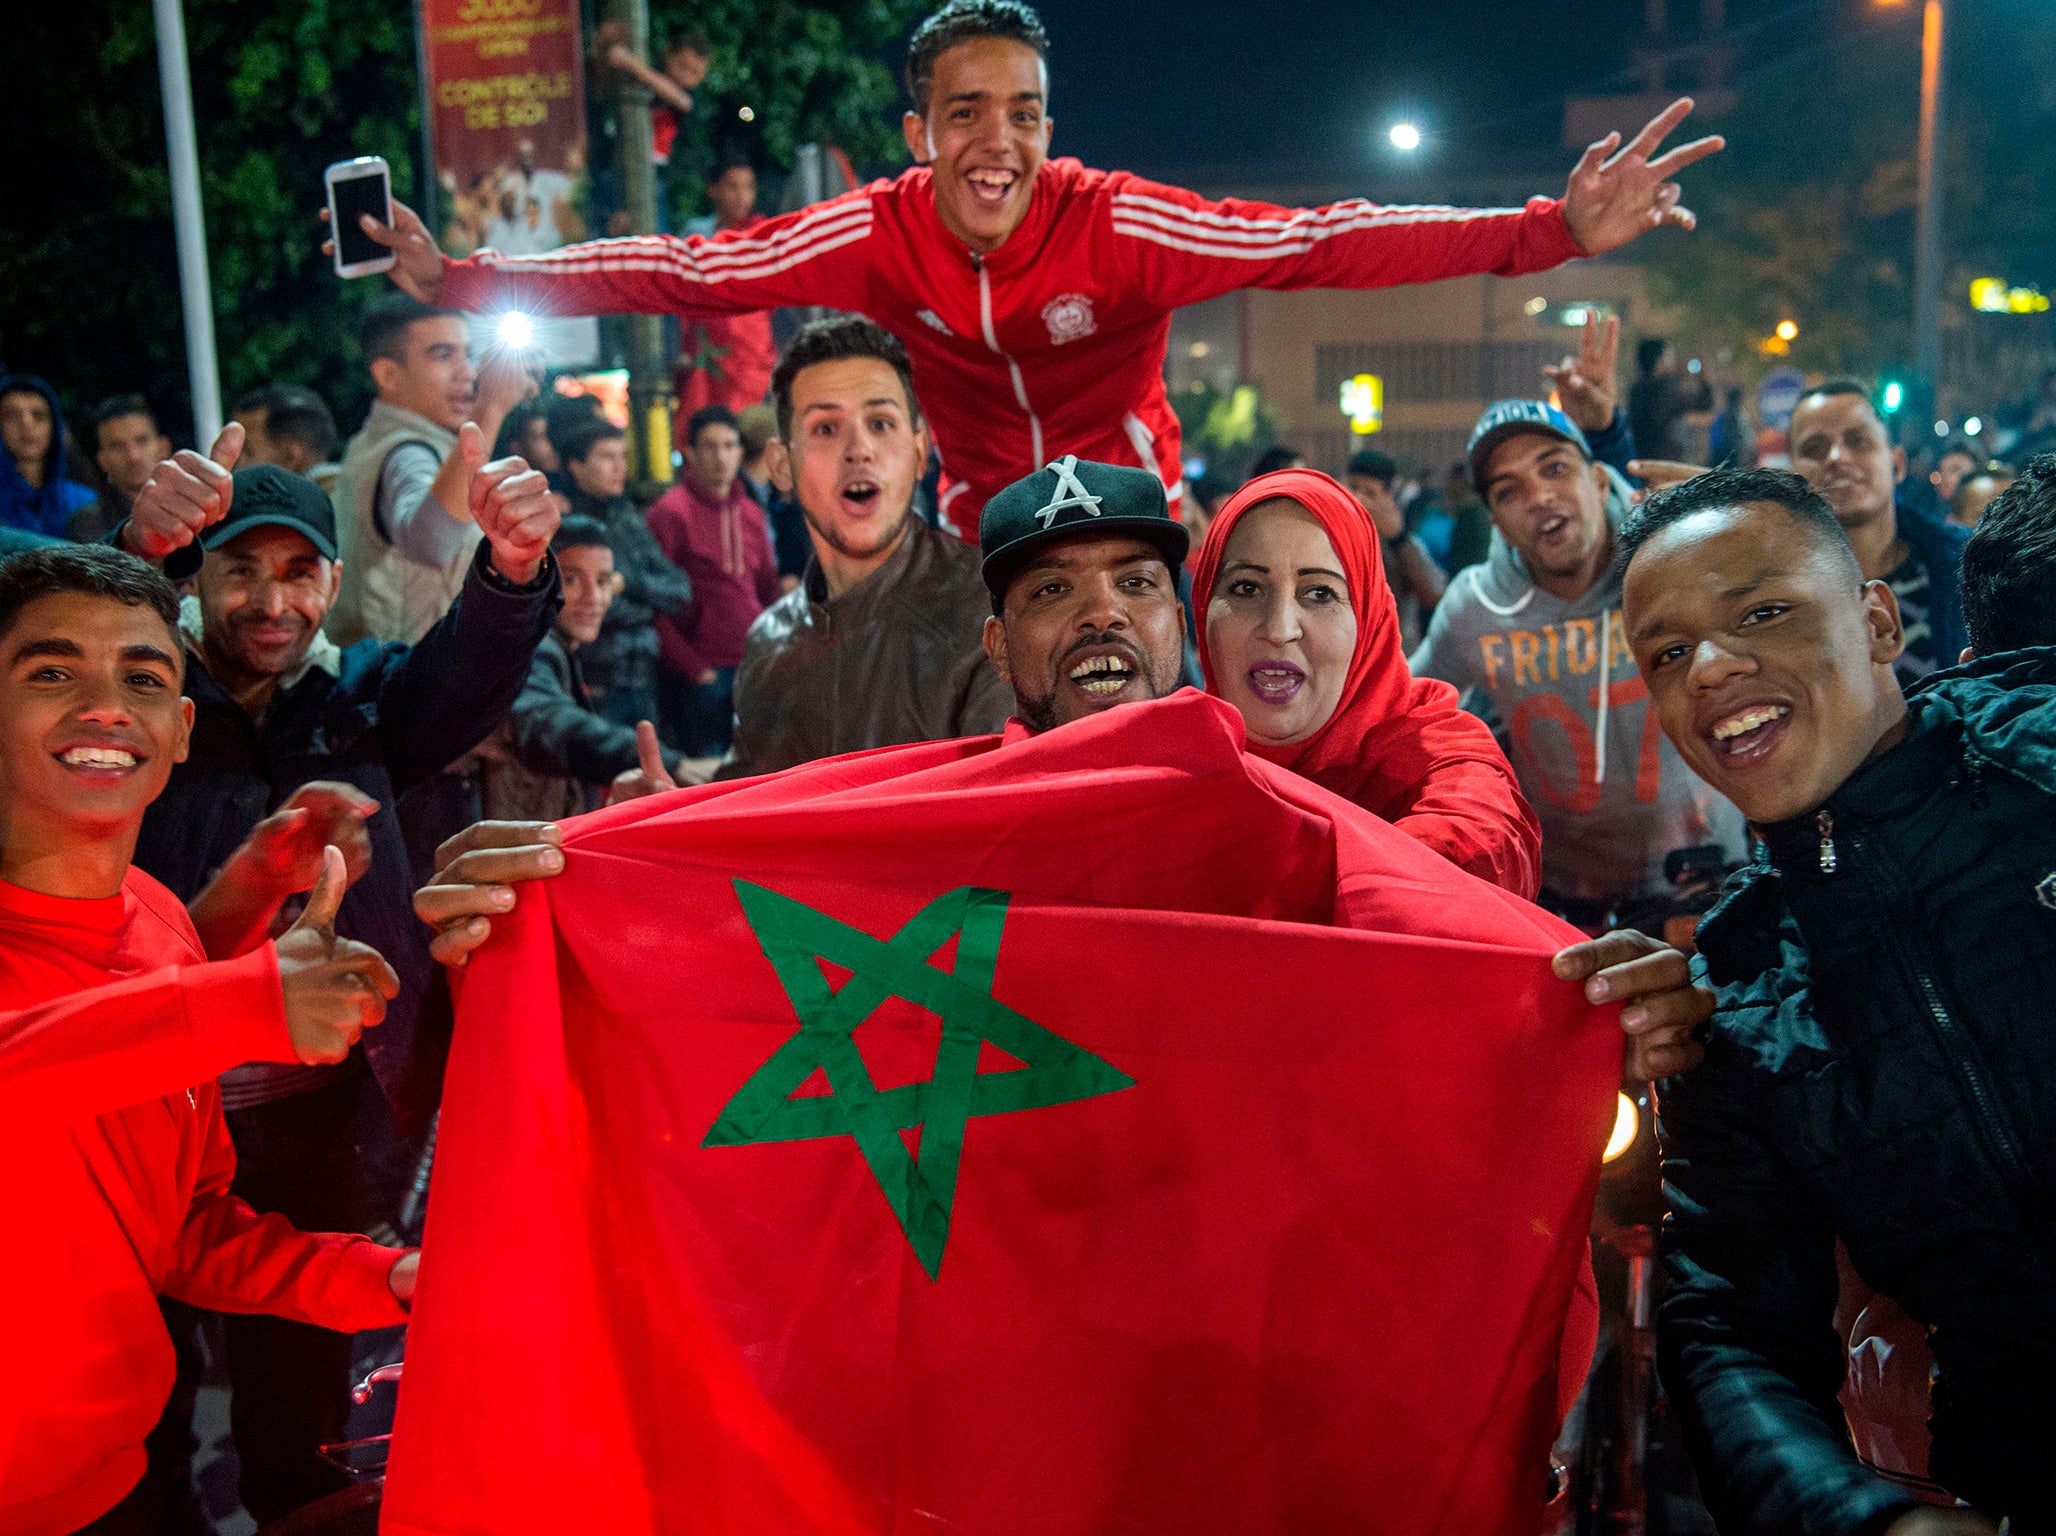 Morocco faces competition from a joint bid proposed by Canada, Mexico and the USA